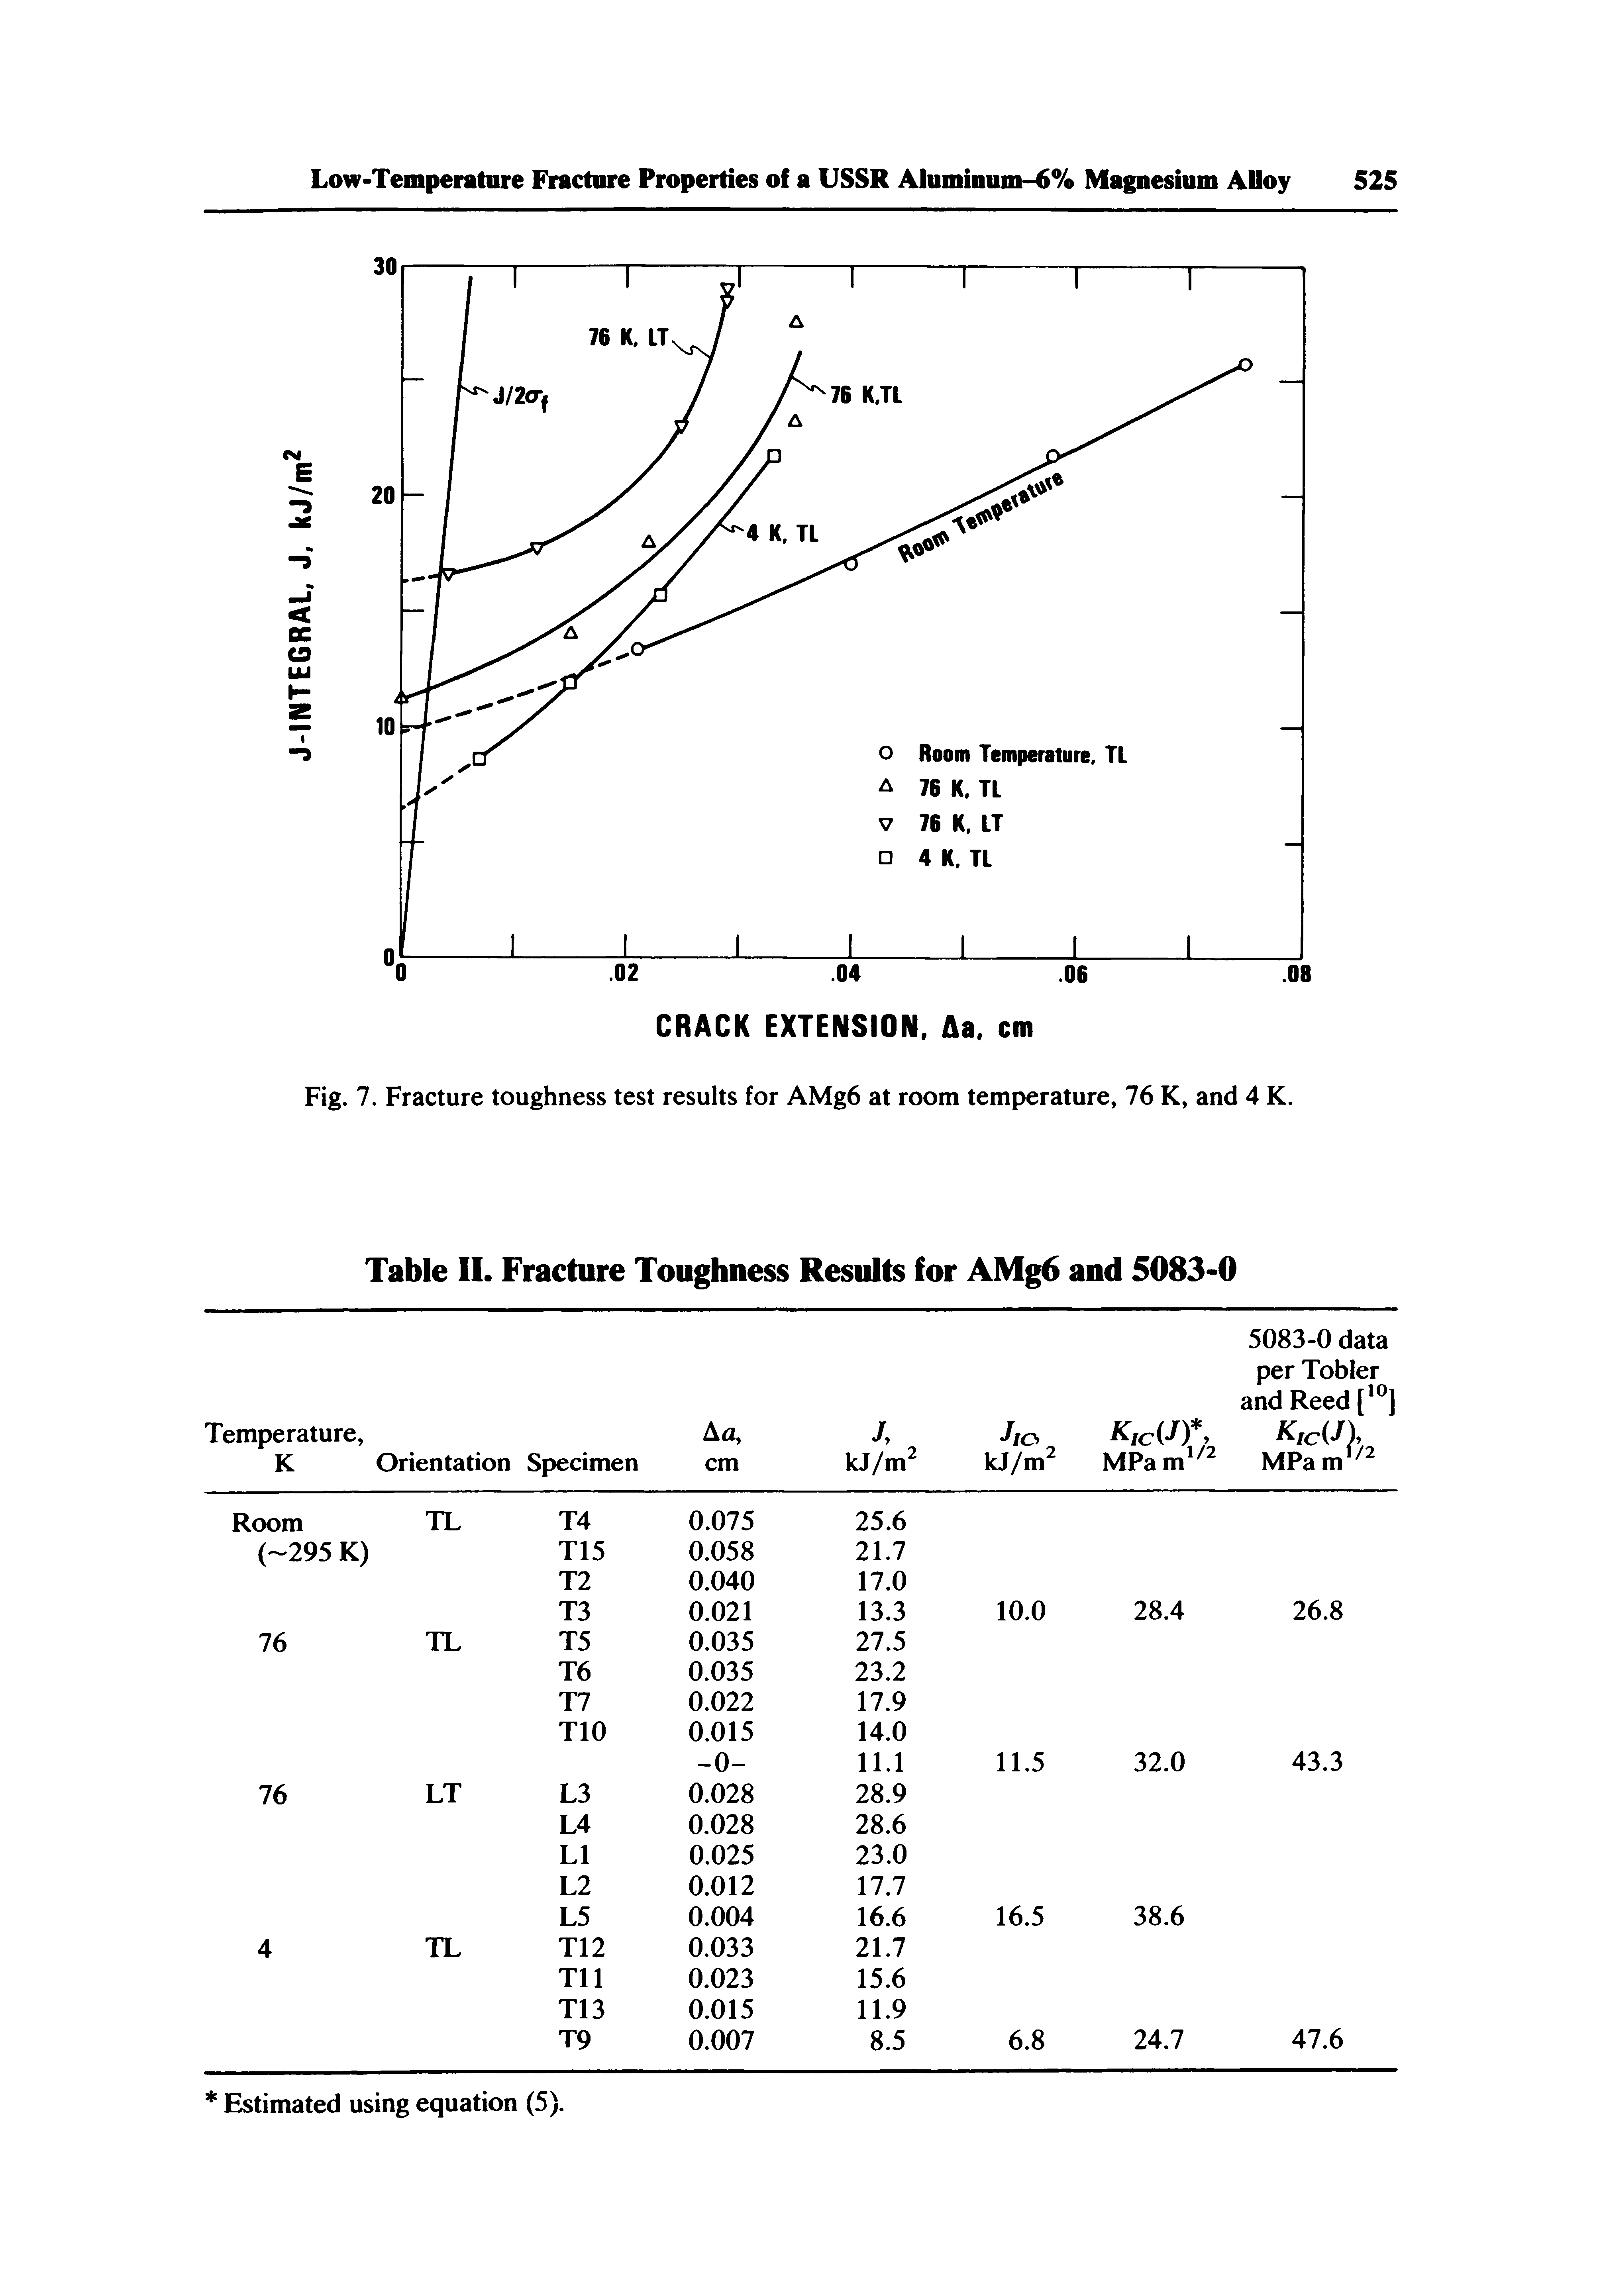 Fig. 7. Fracture toughness test results for AMg6 at room temperature, 76 K, and 4 K.